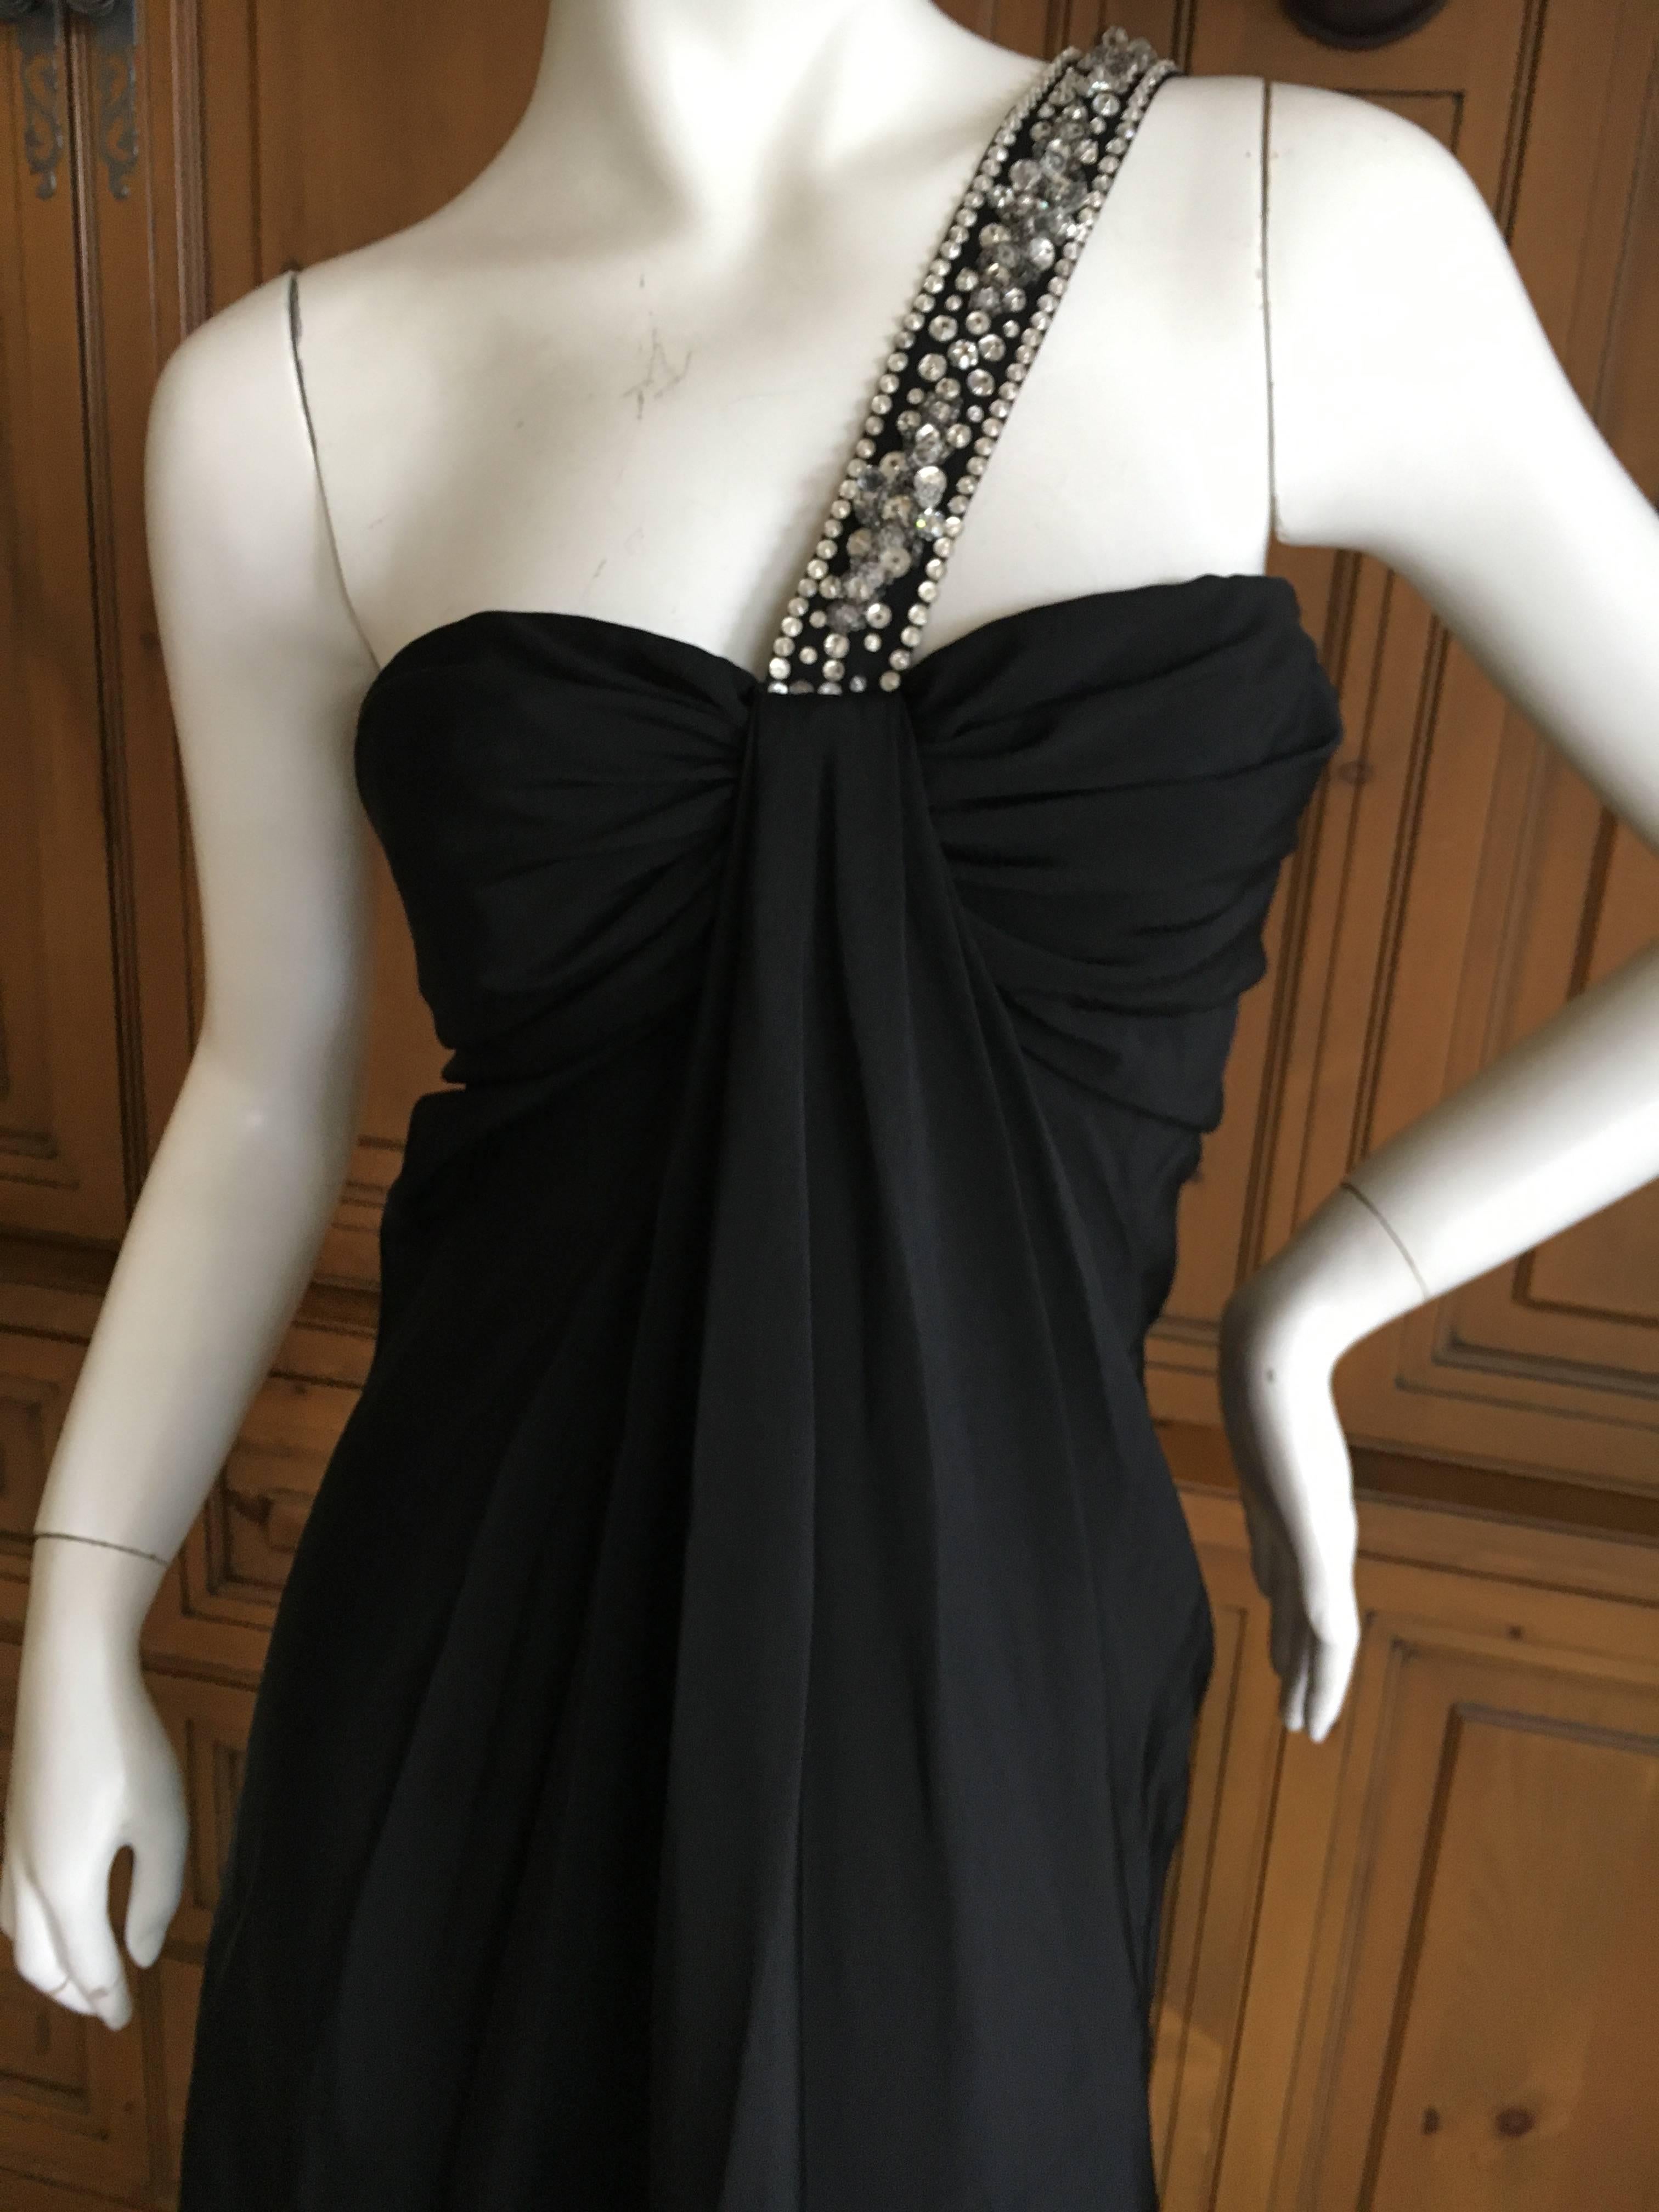  Galanos for Martha Park Avenue Black Silk Crepe Dress with Jeweled Strap For Sale 4